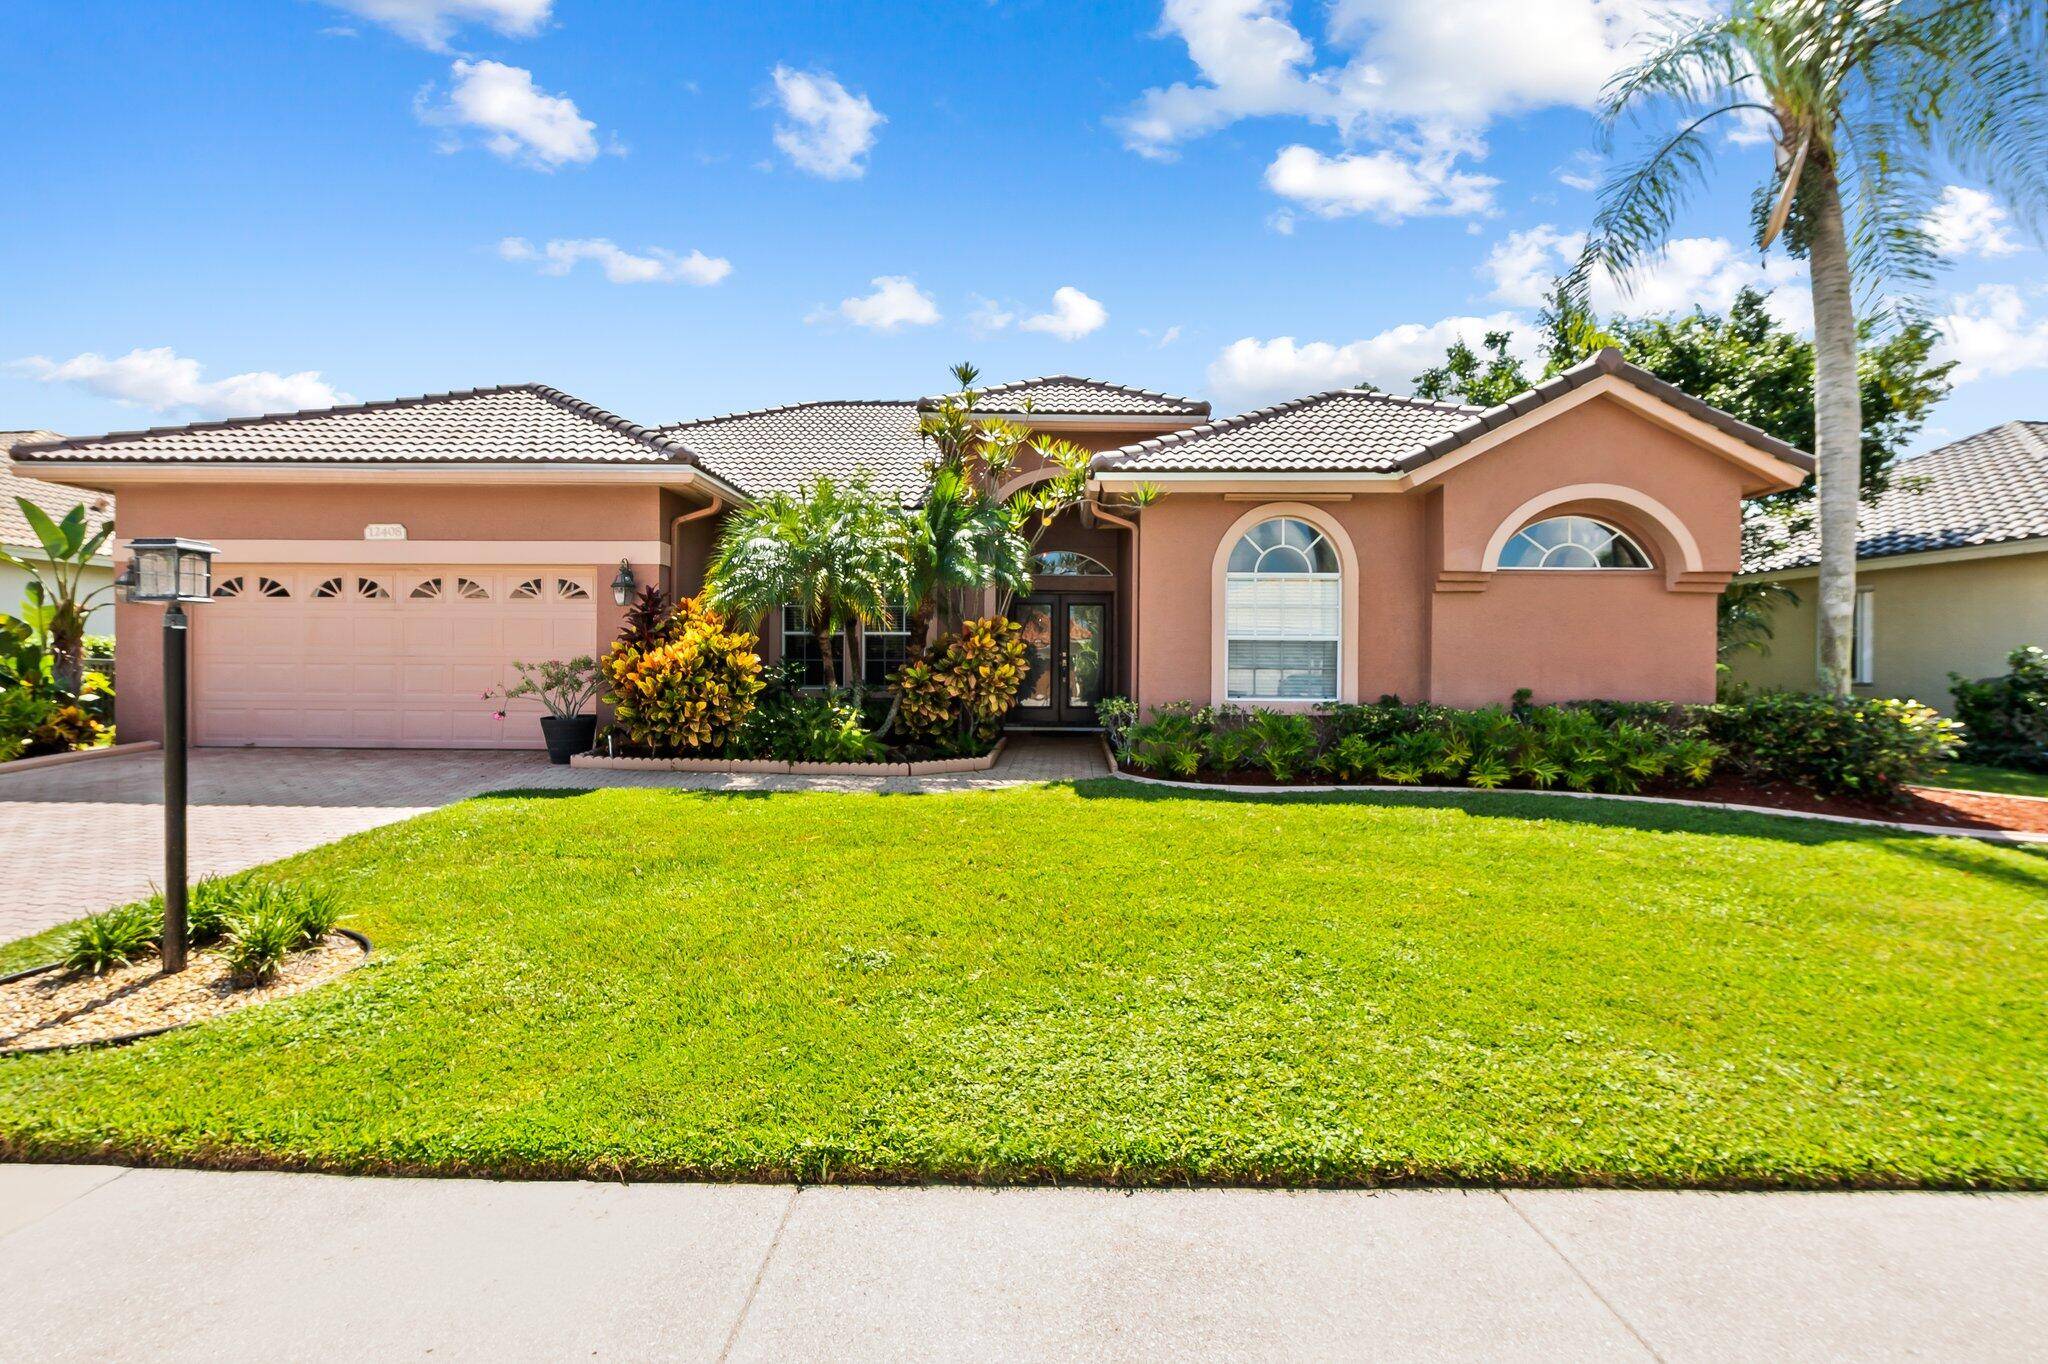 Don't miss this great family home with desirable split floor plan in the gated community of Boca Falls.